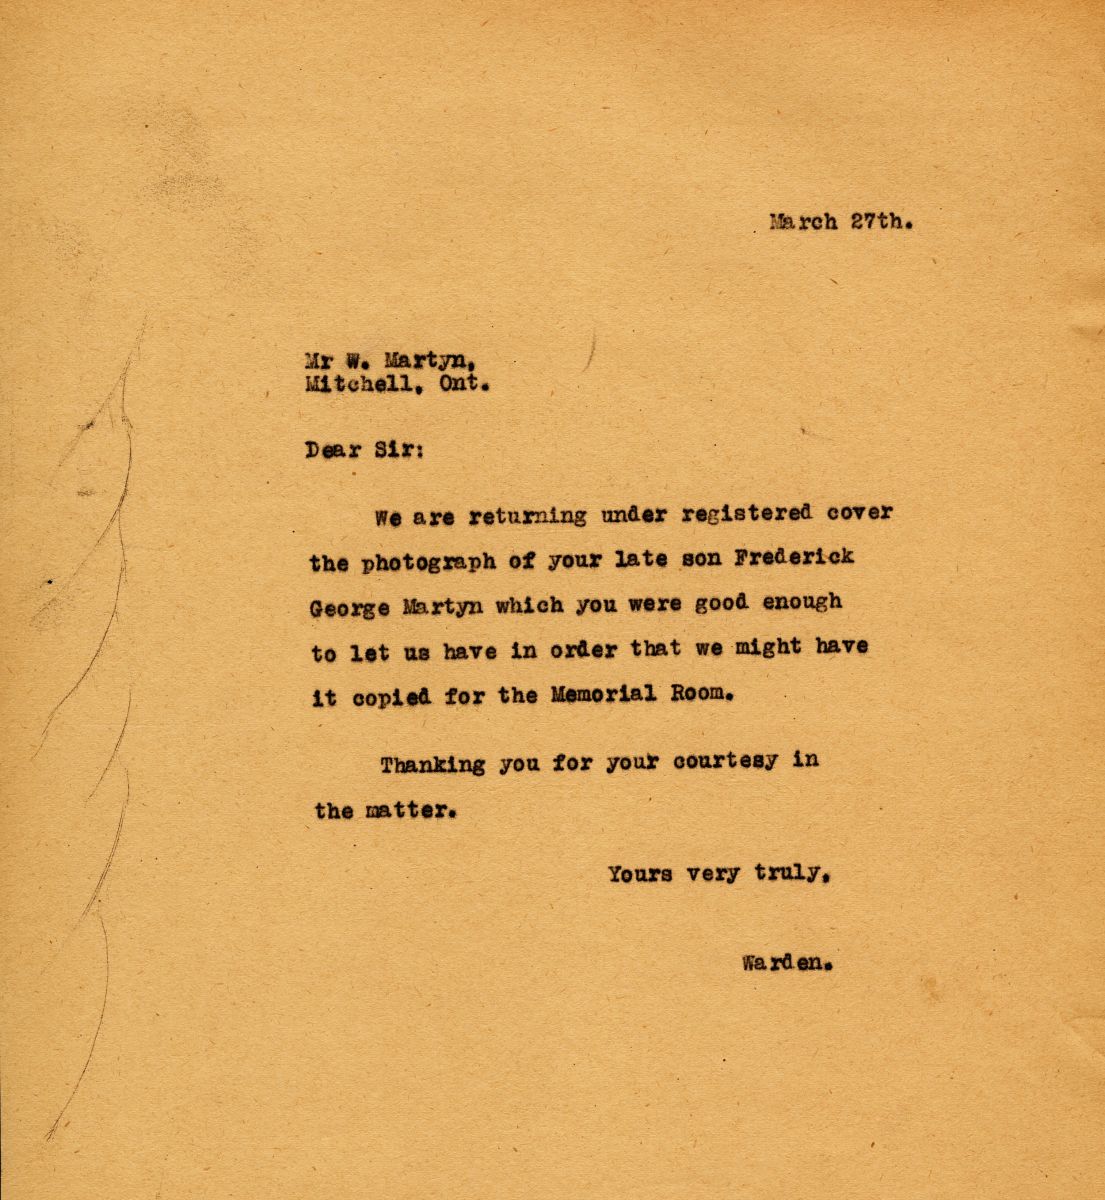 Letter from the Warden to Mr. W. Martyn, 27th March